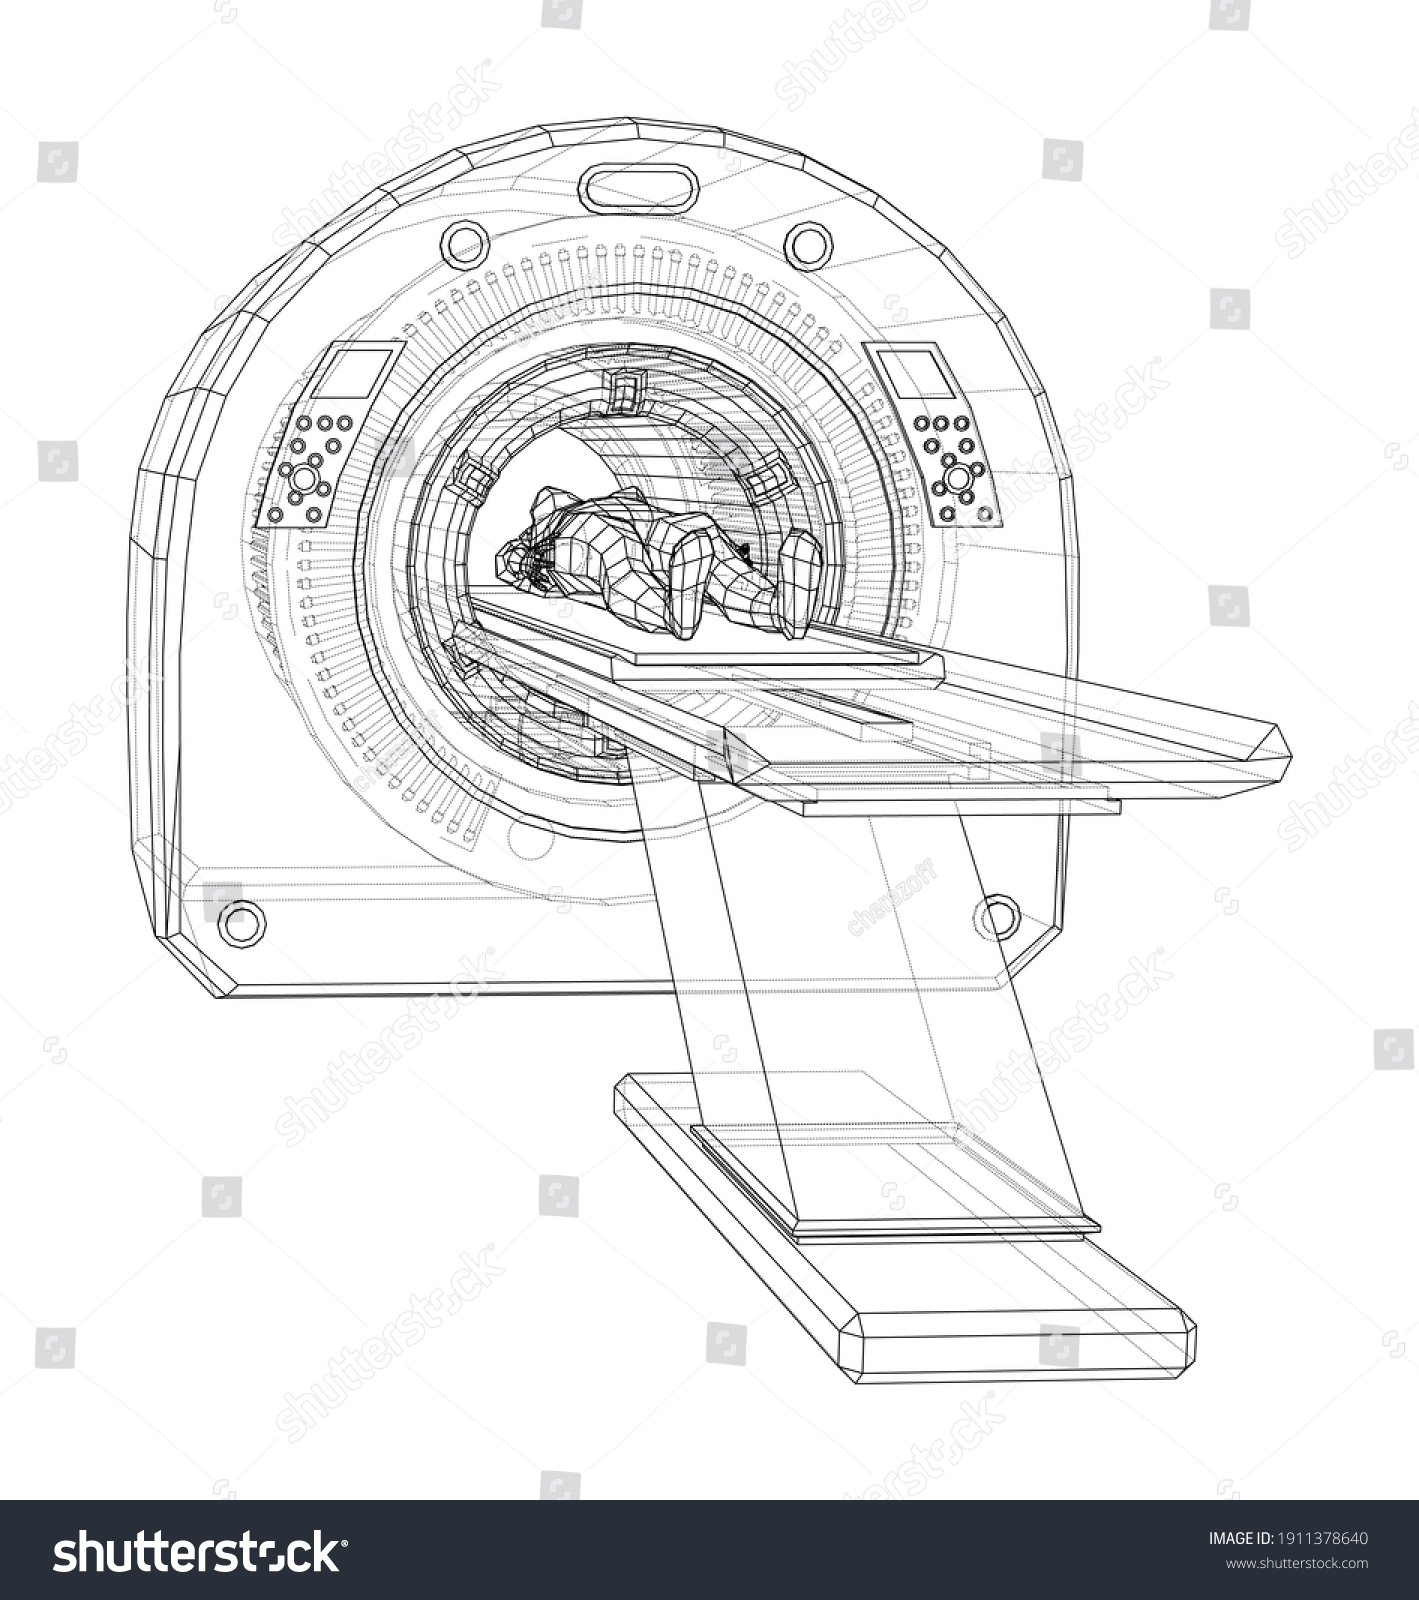 SVG of Female Patient Lying on a CT or MRI Scan. Wire-frame style. Vector 3d rendering svg